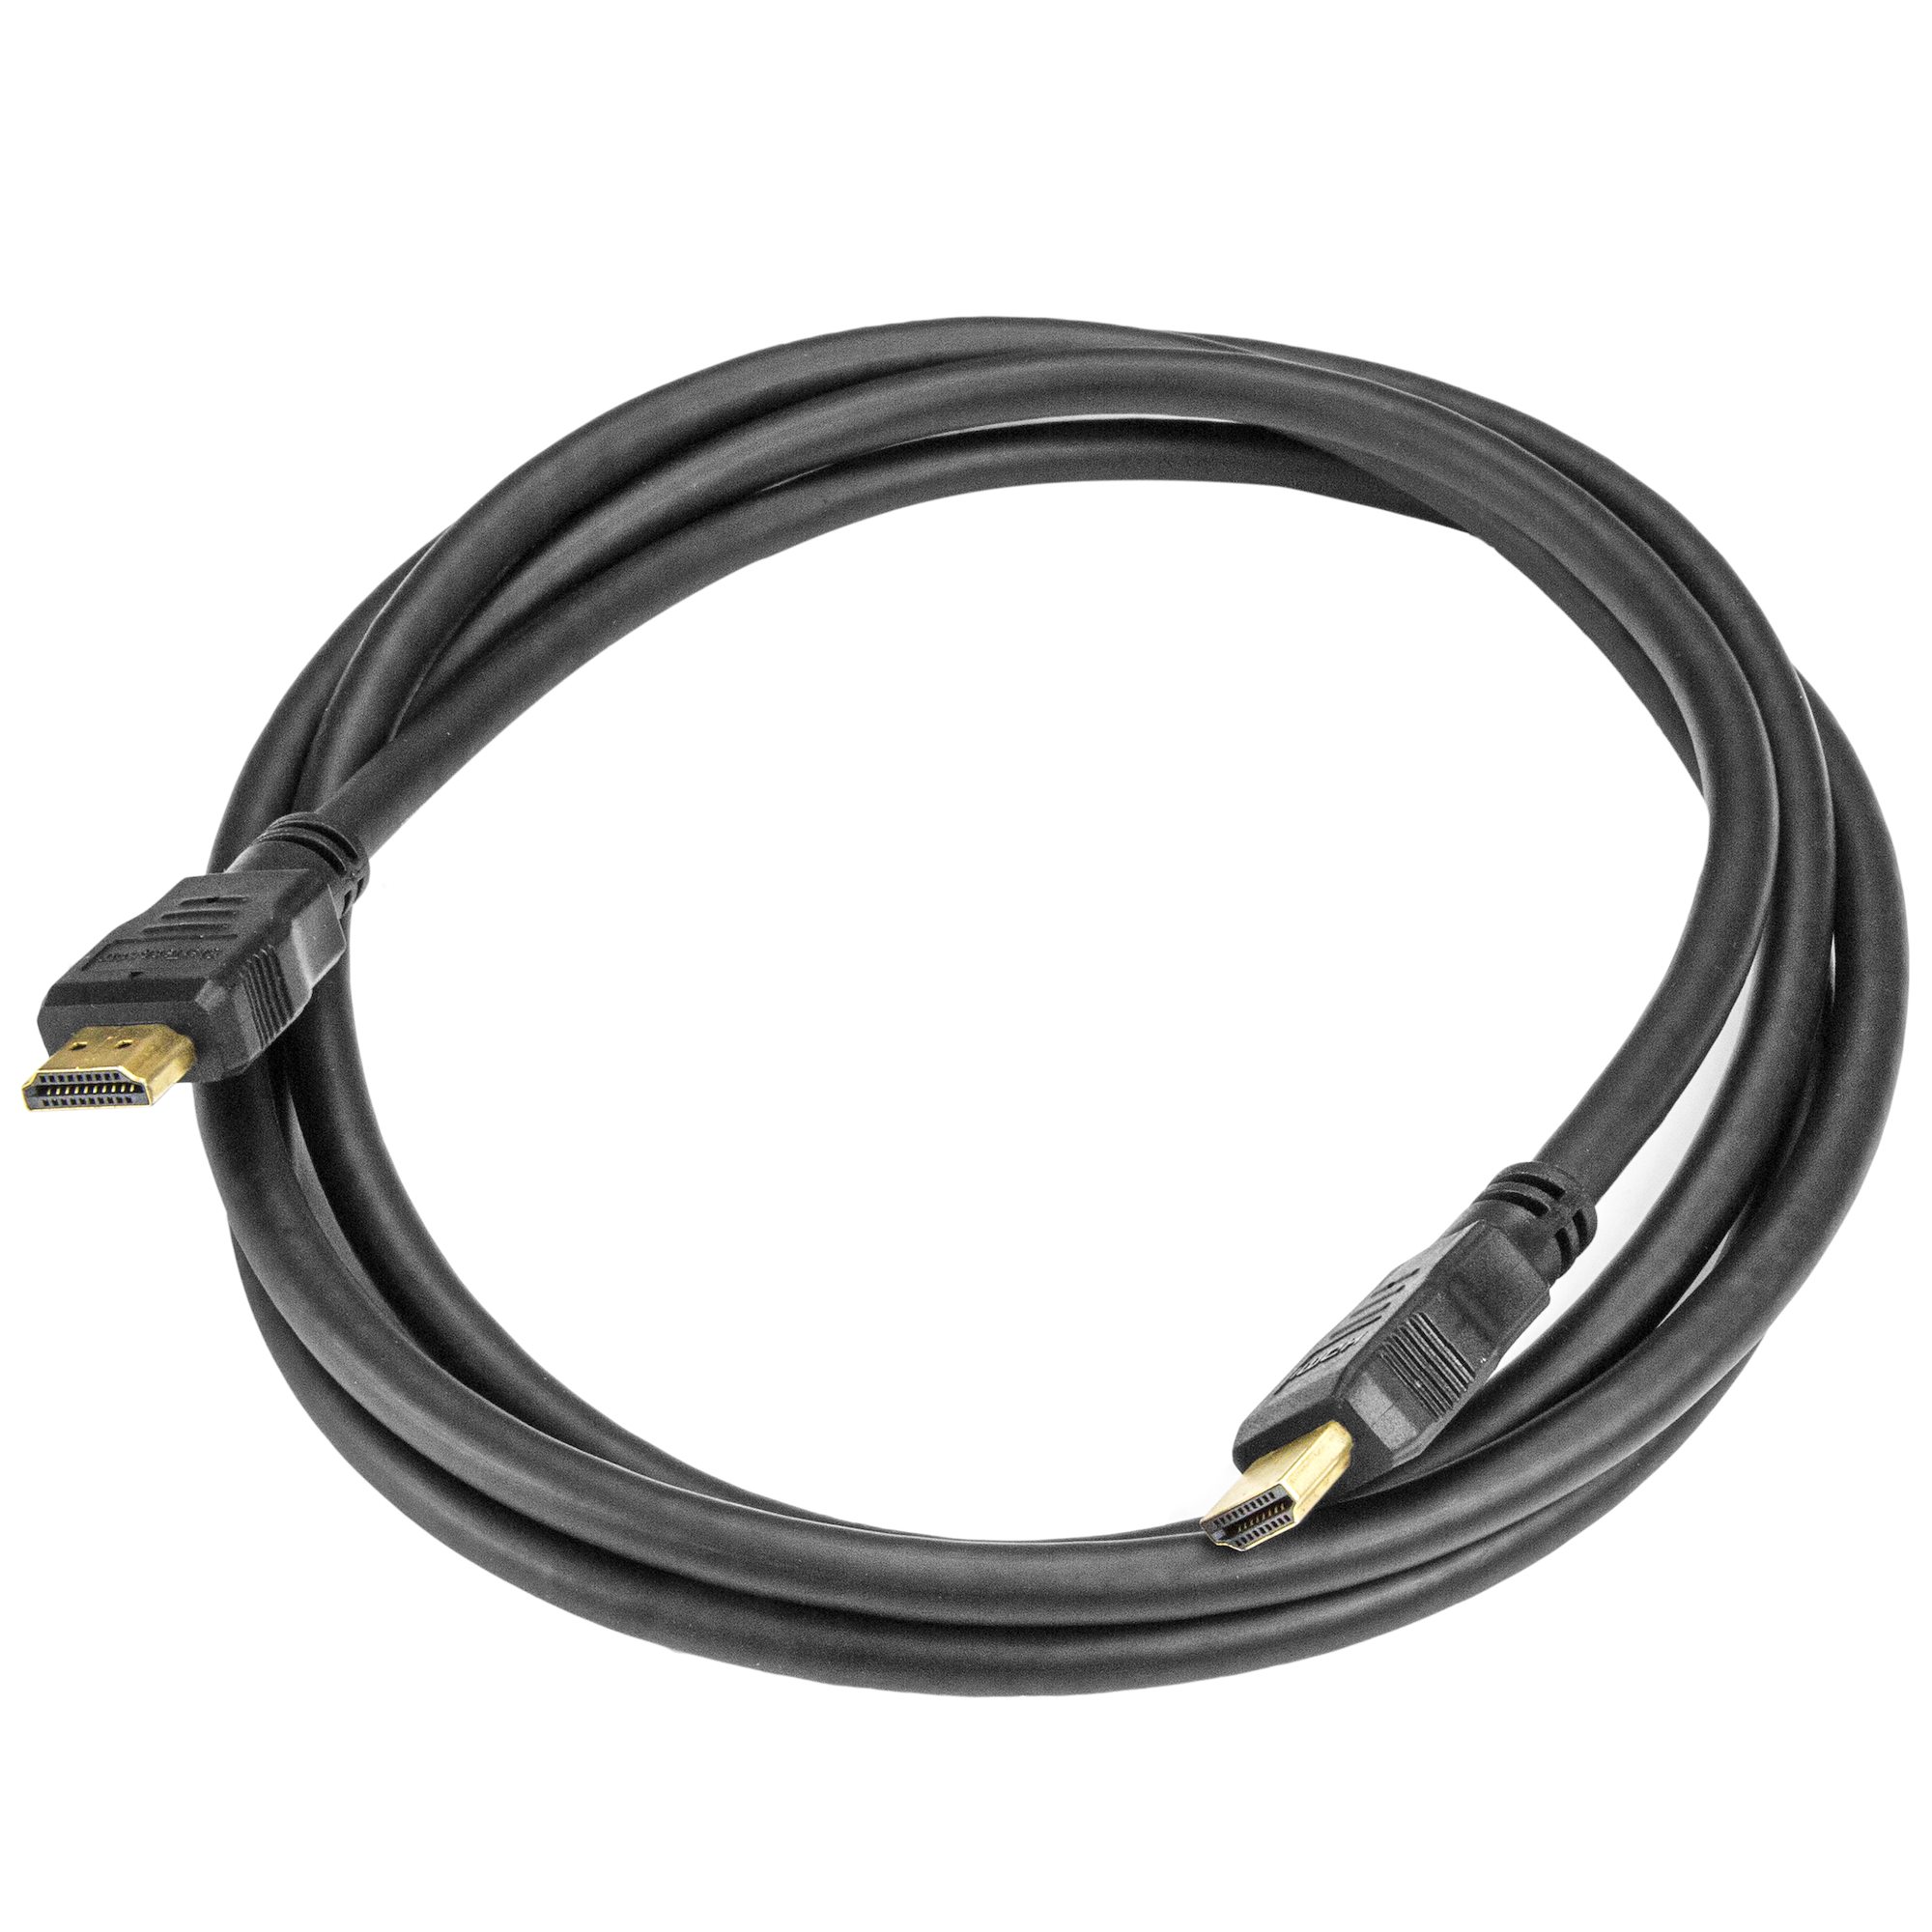 6ft 4K High Speed HDMI Cable - HDMI 1.4 - HDMI® Cables & HDMI Adapters